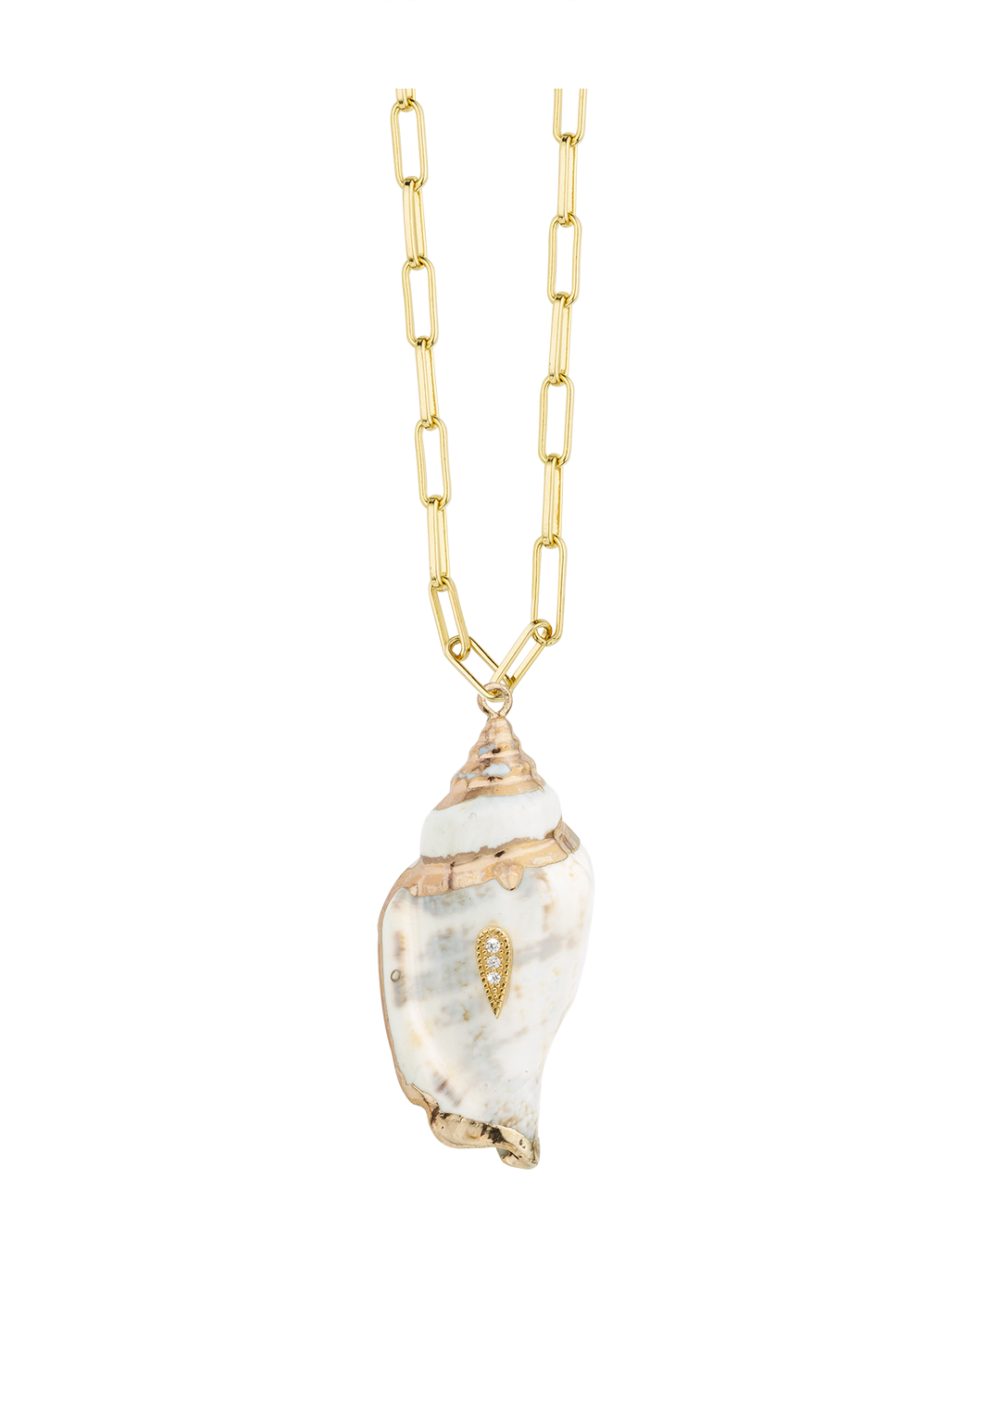 Tendance Ete 2020 Fashion Blog Mode Mya Bay Bijou Jewelry Or Gold Necklace Collier Shell Coquillage